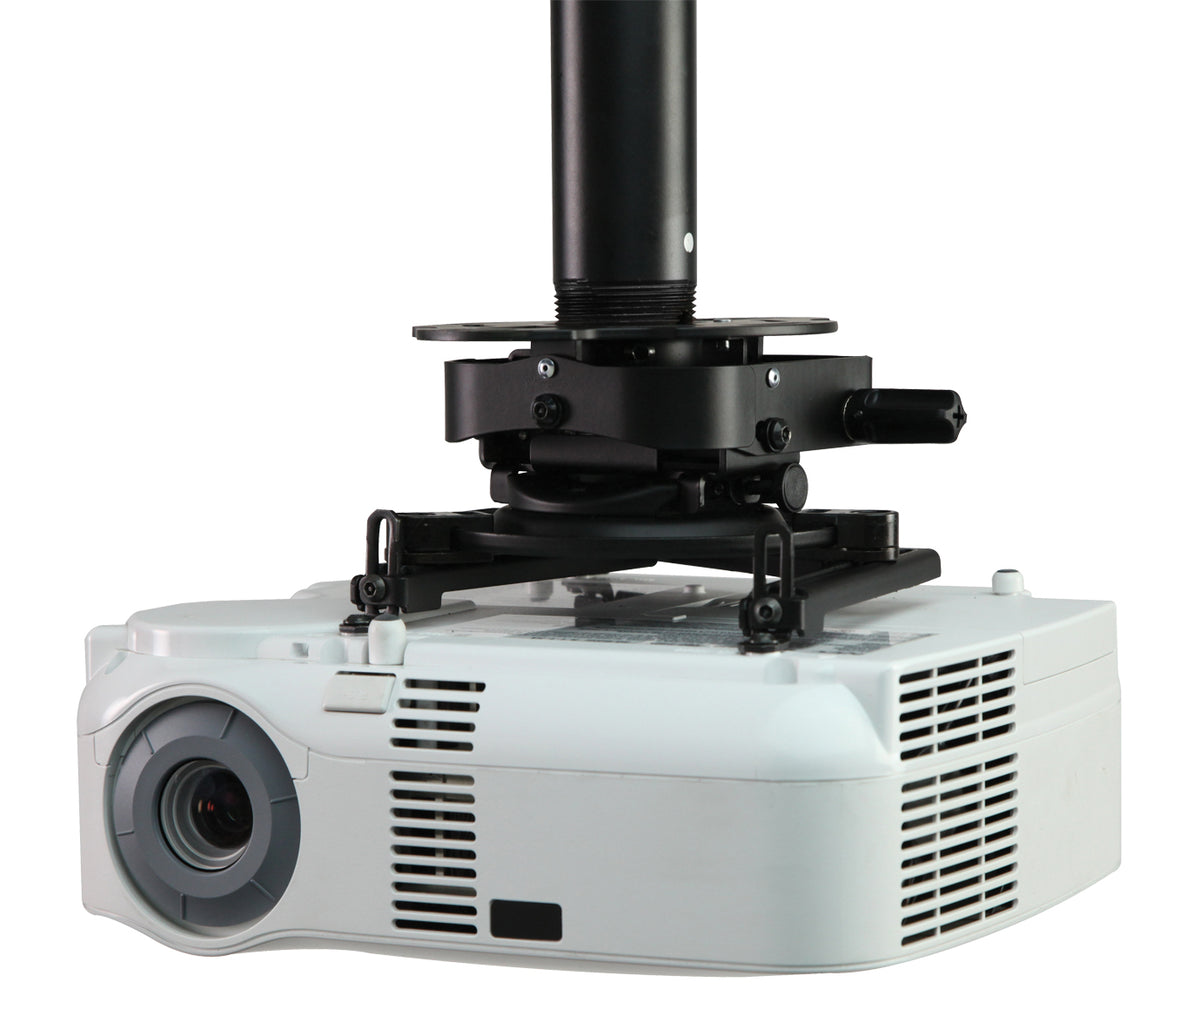 PRGS Projector Mount for Projectors up to 50lb (22kg) – Peerless-AV